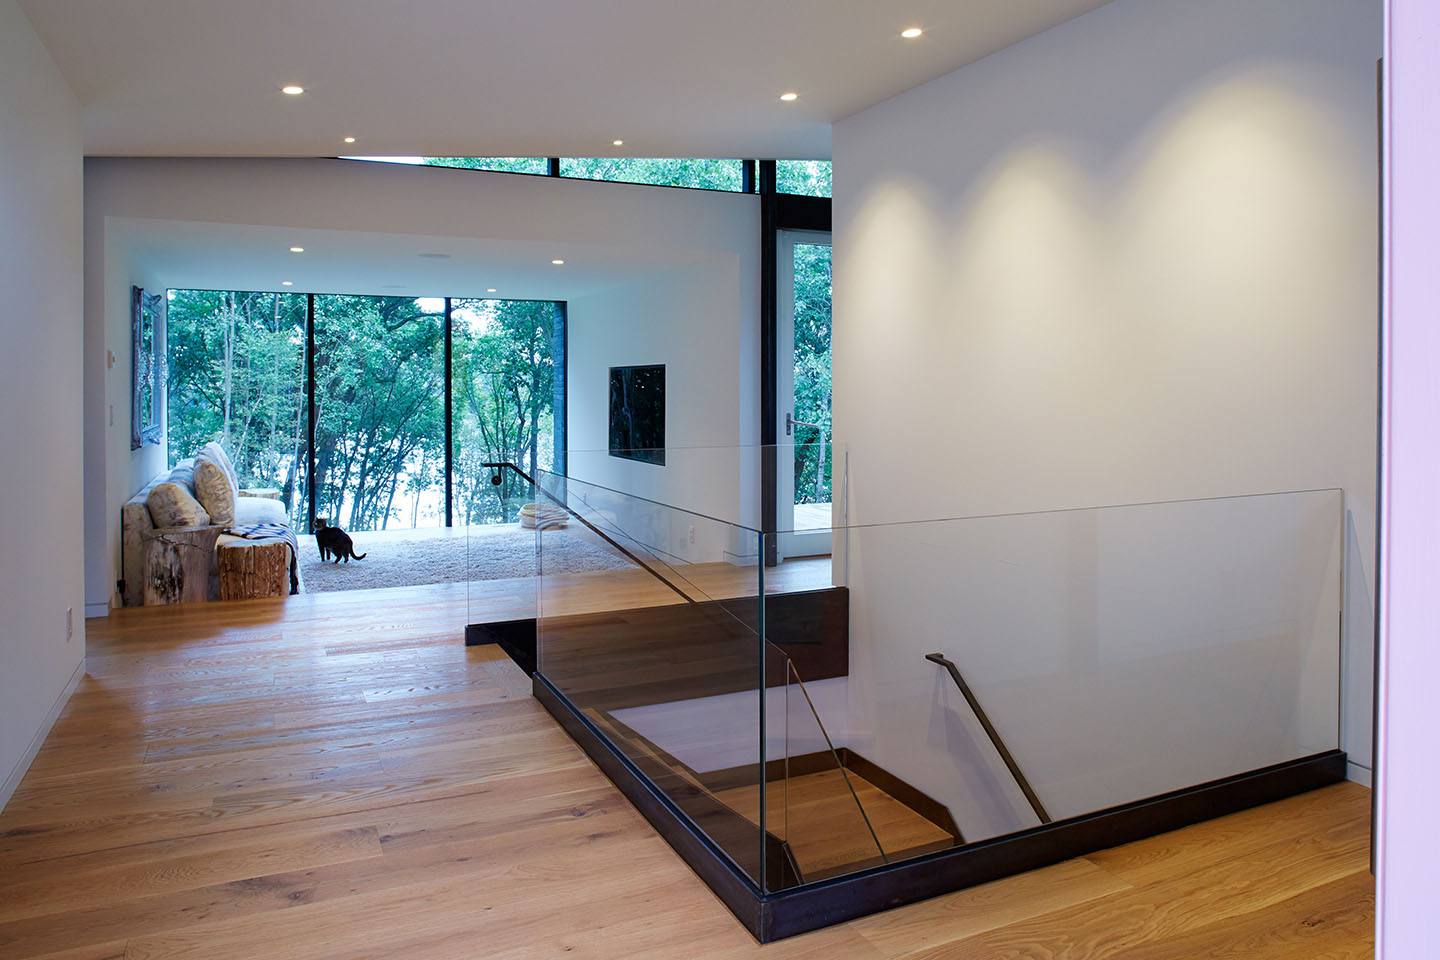 Clear glass railing at the top of the stairs in a modern home. Solid piece of glass with a base fixture.